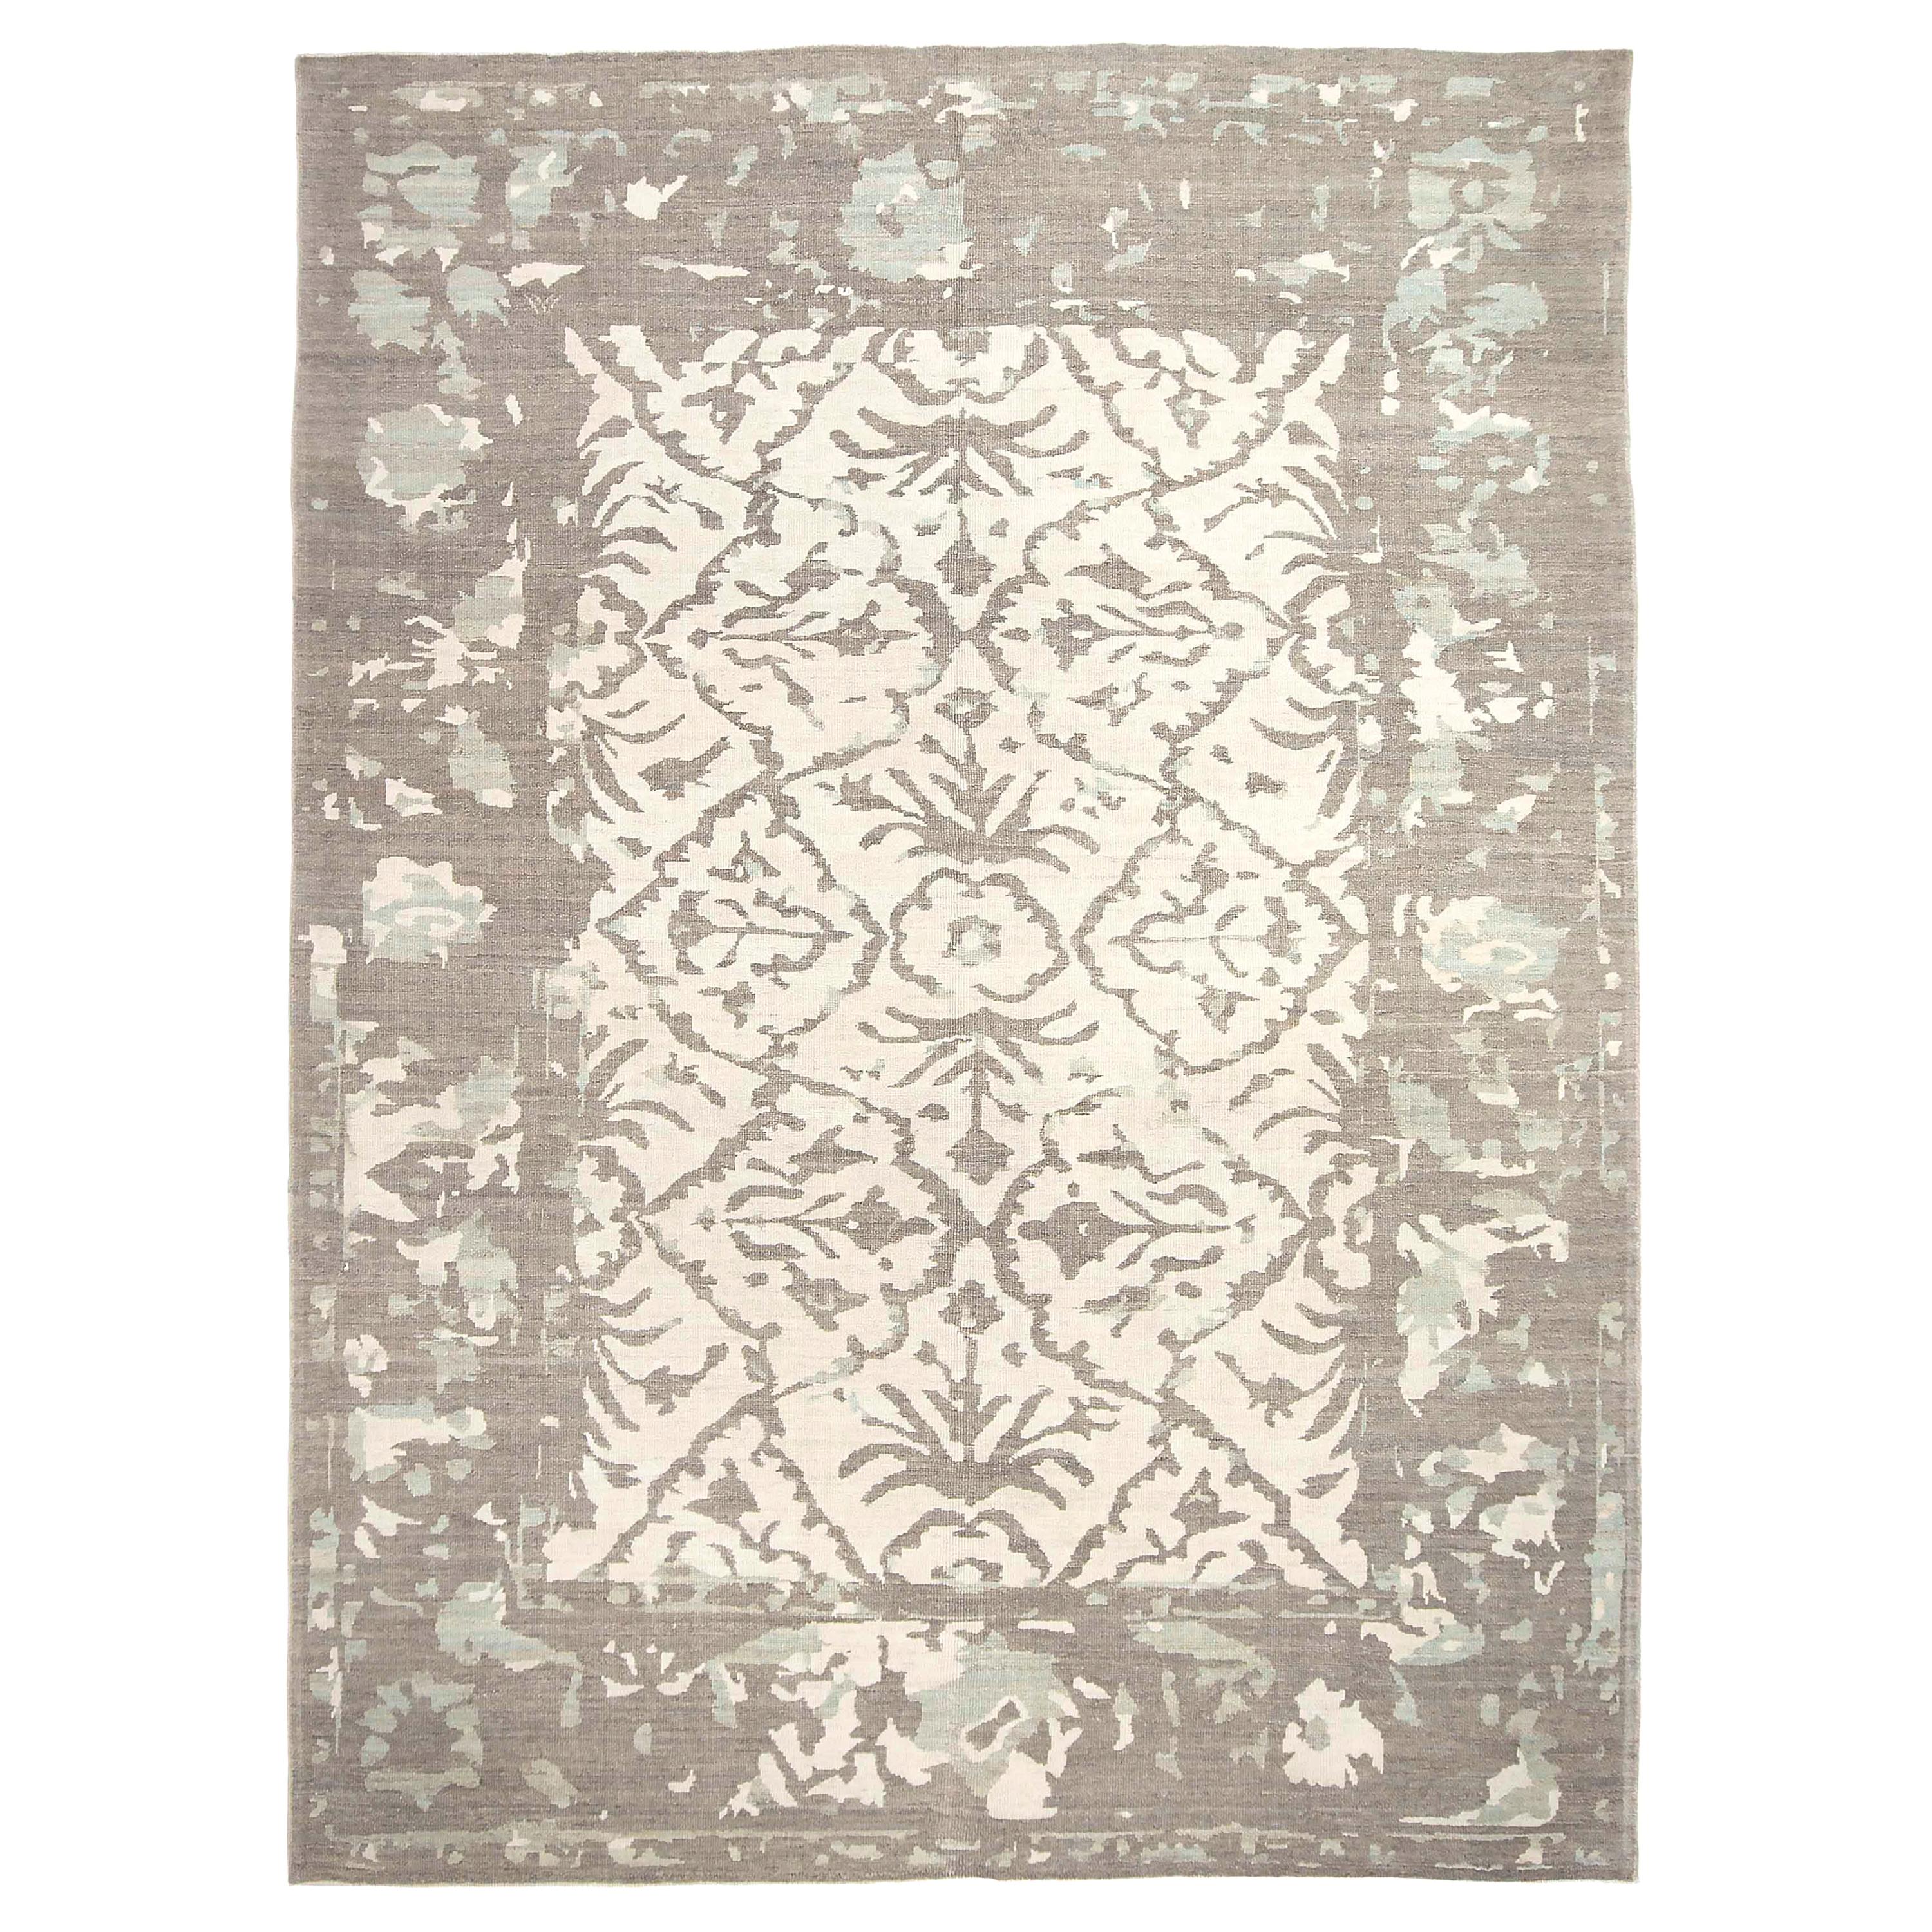 Contemporary Turkish Oushak Rug with Blue Floral Details on Brown & Beige Field